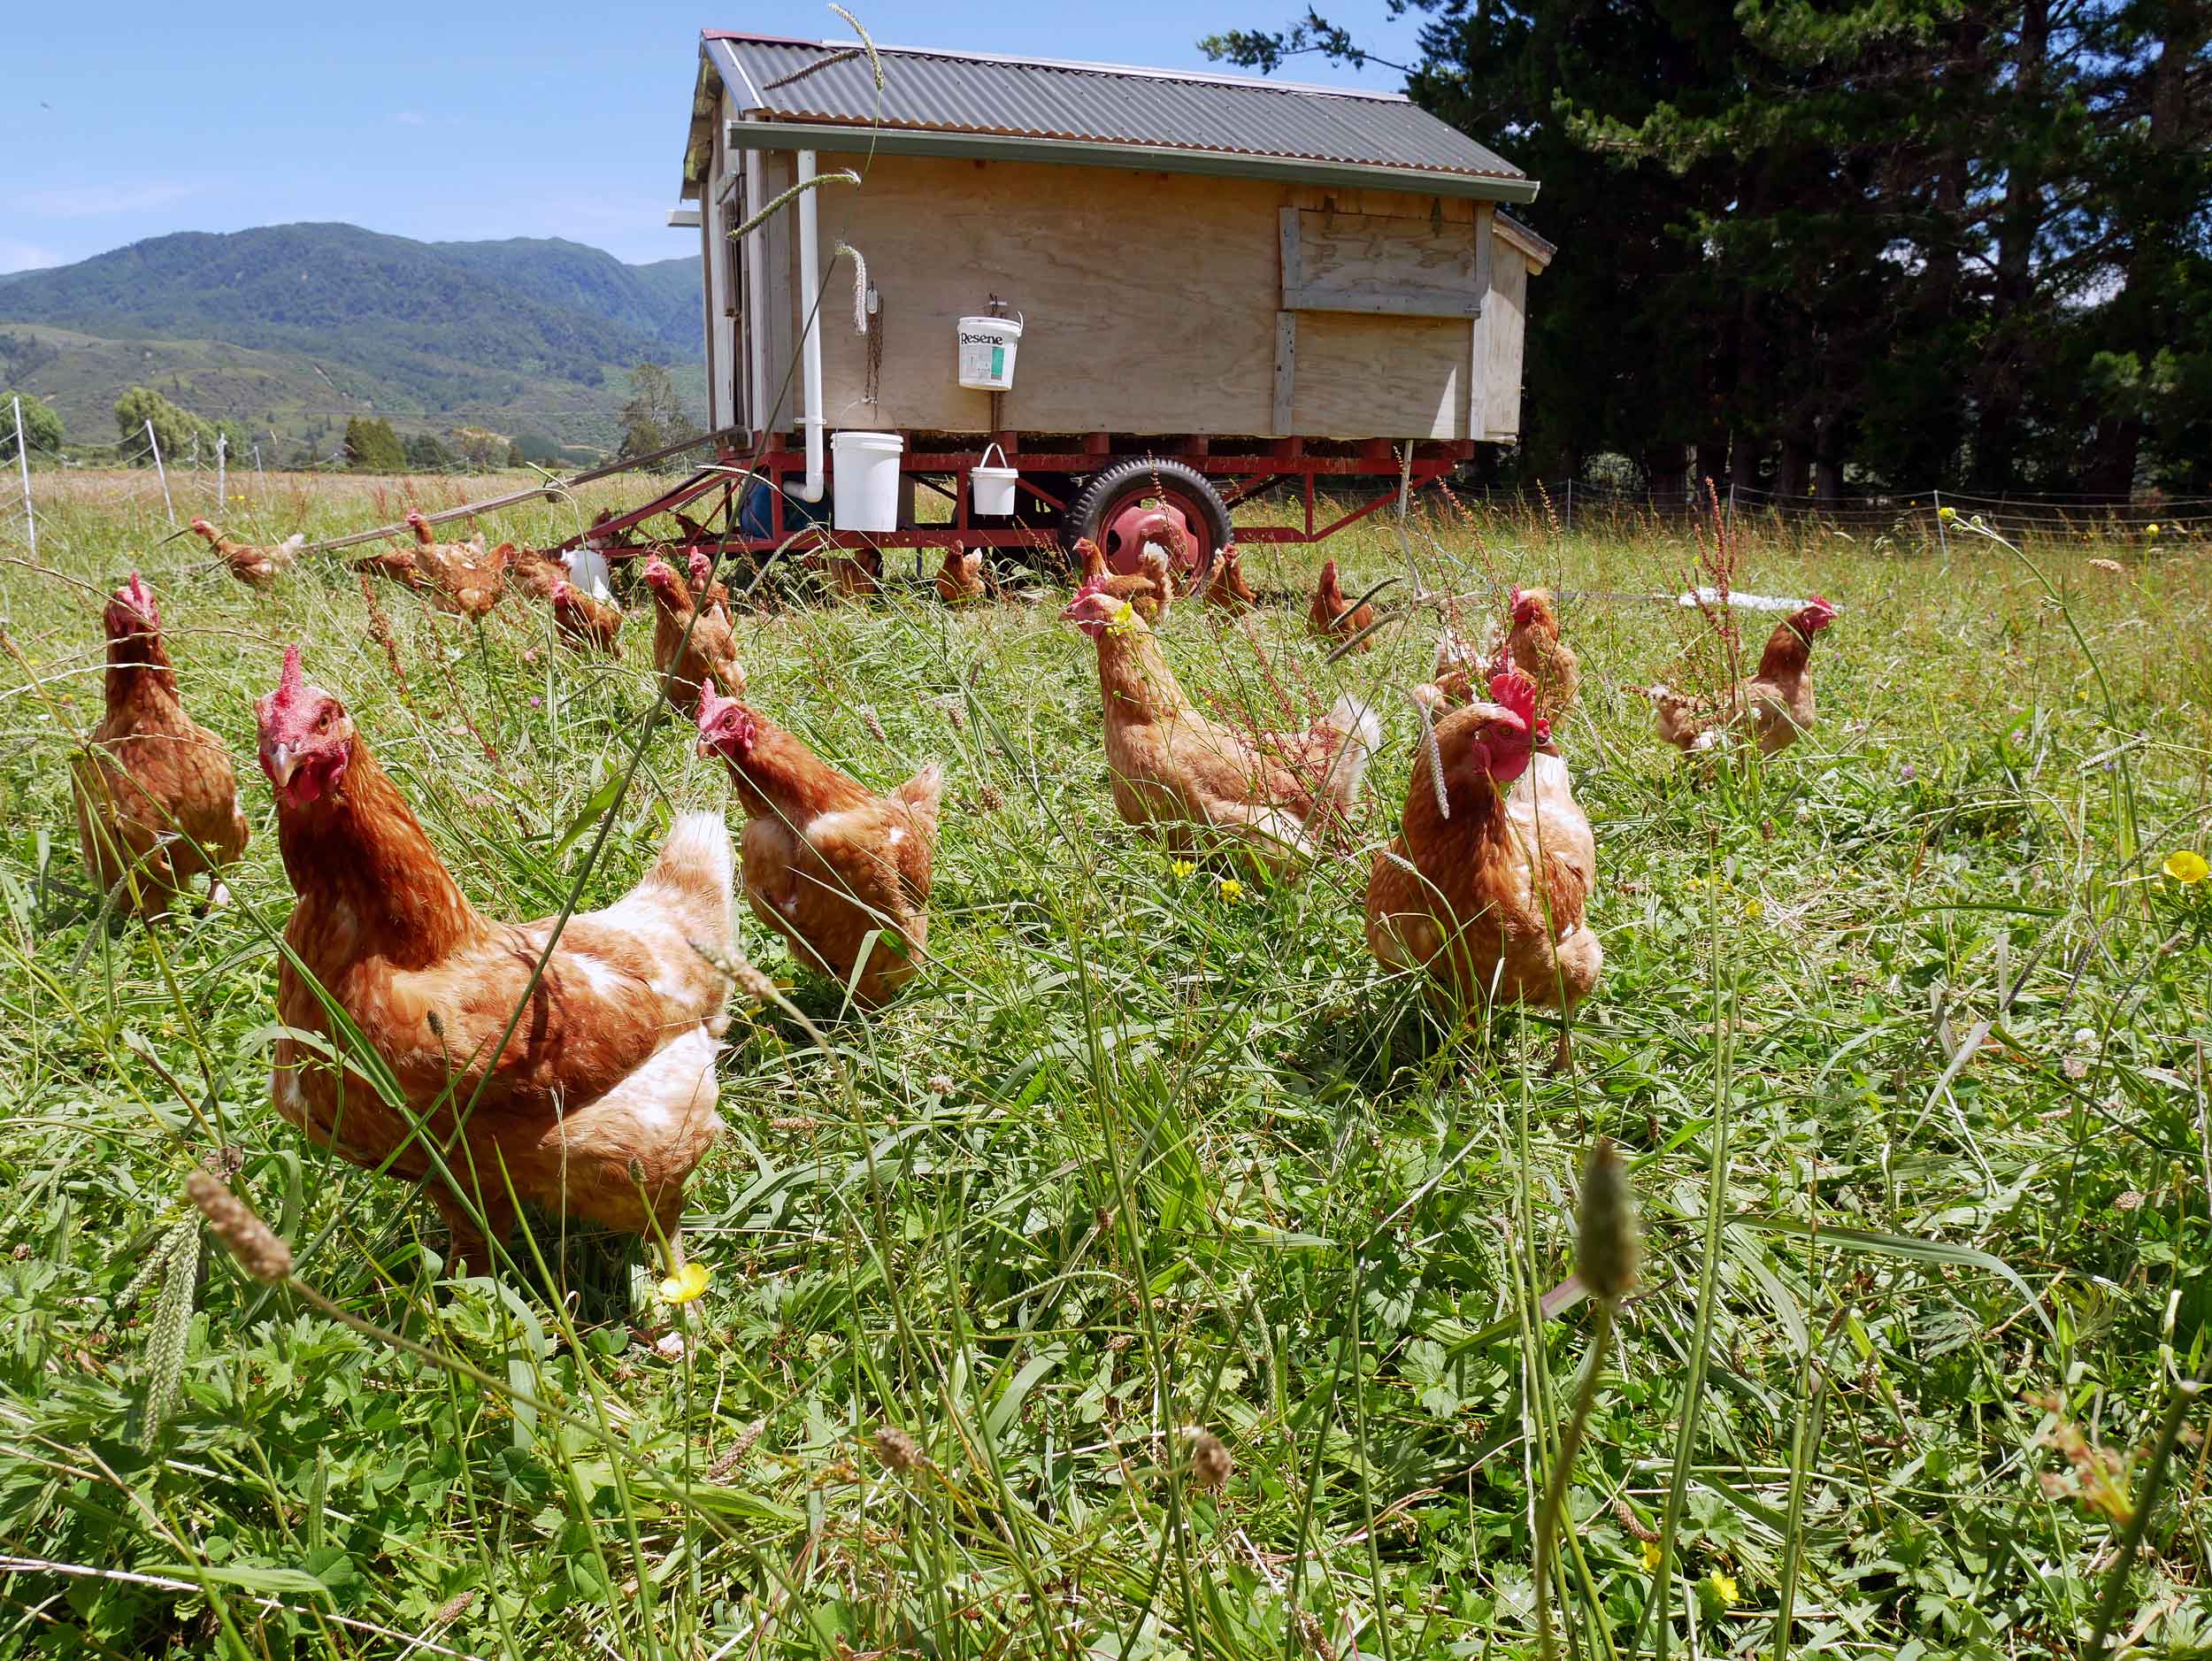  Meet the lovely ladies of Puramahoi Fields, who produce fresh eggs daily (even through moulting periods).&nbsp; 